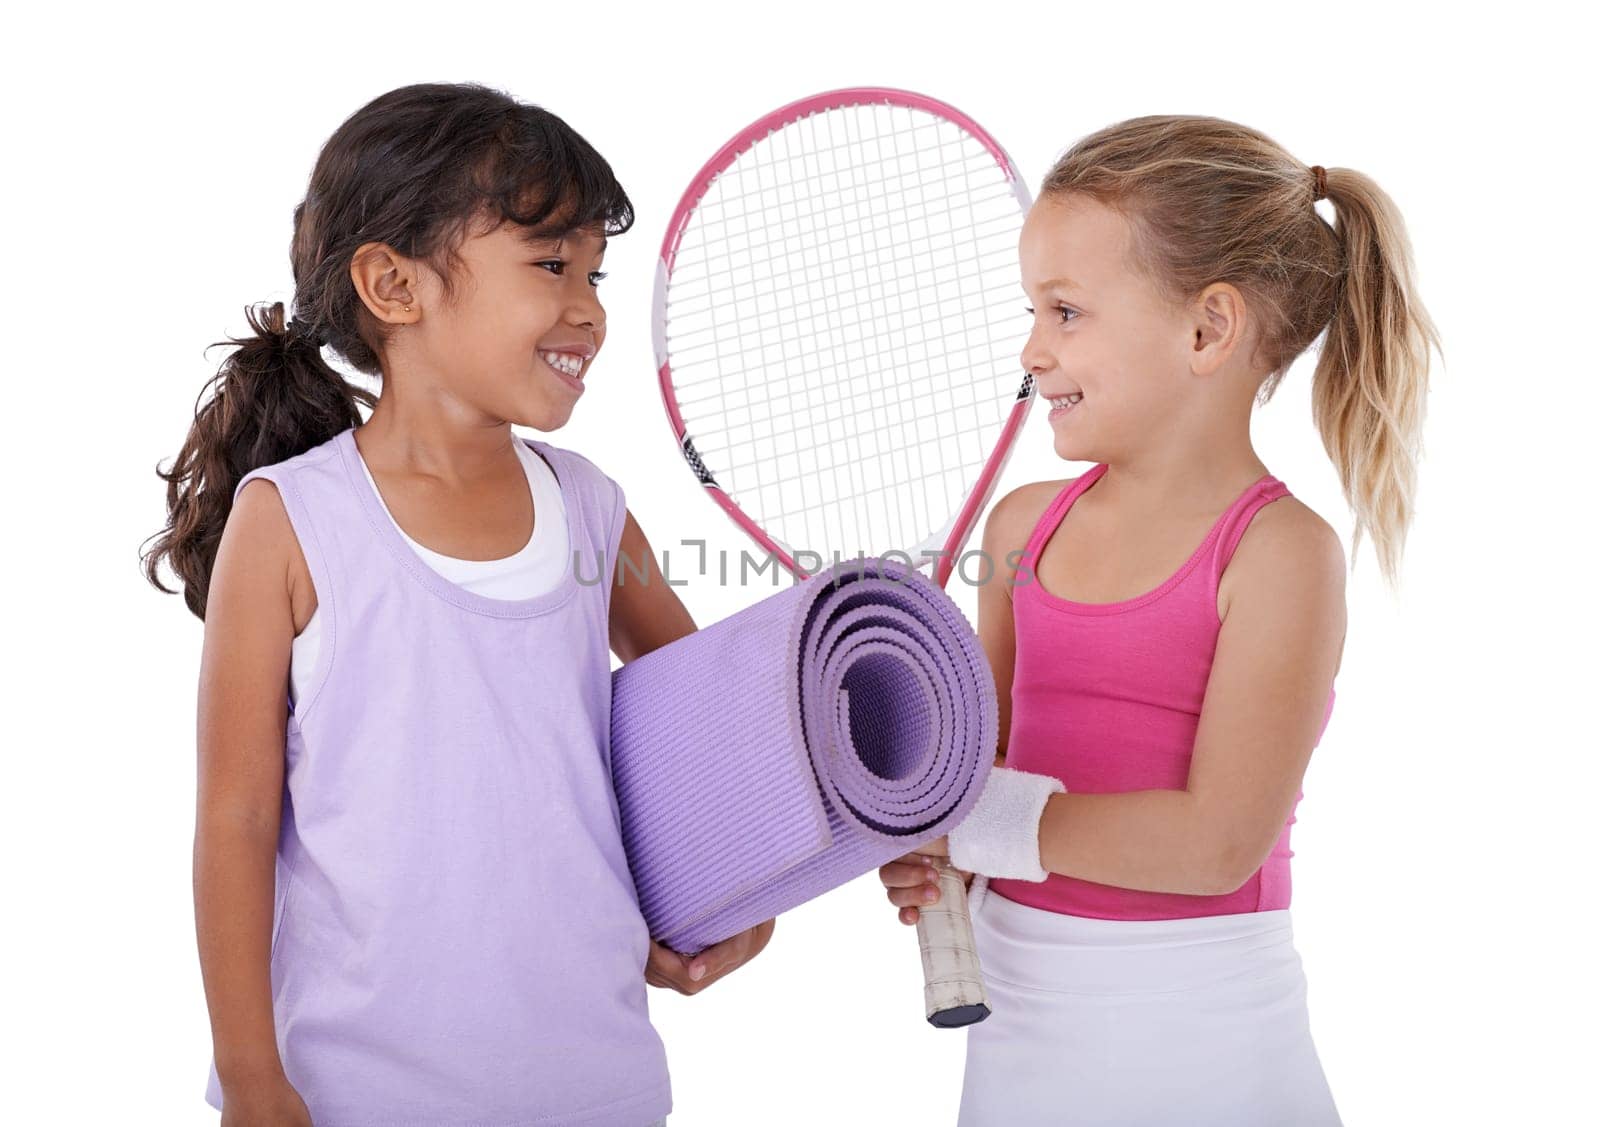 Tennis, happy and children on a white background for sports training, workout and exercise. Fitness, friends and isolated young kids with yoga mat, racket and gym equipment for hobby in studio by YuriArcurs